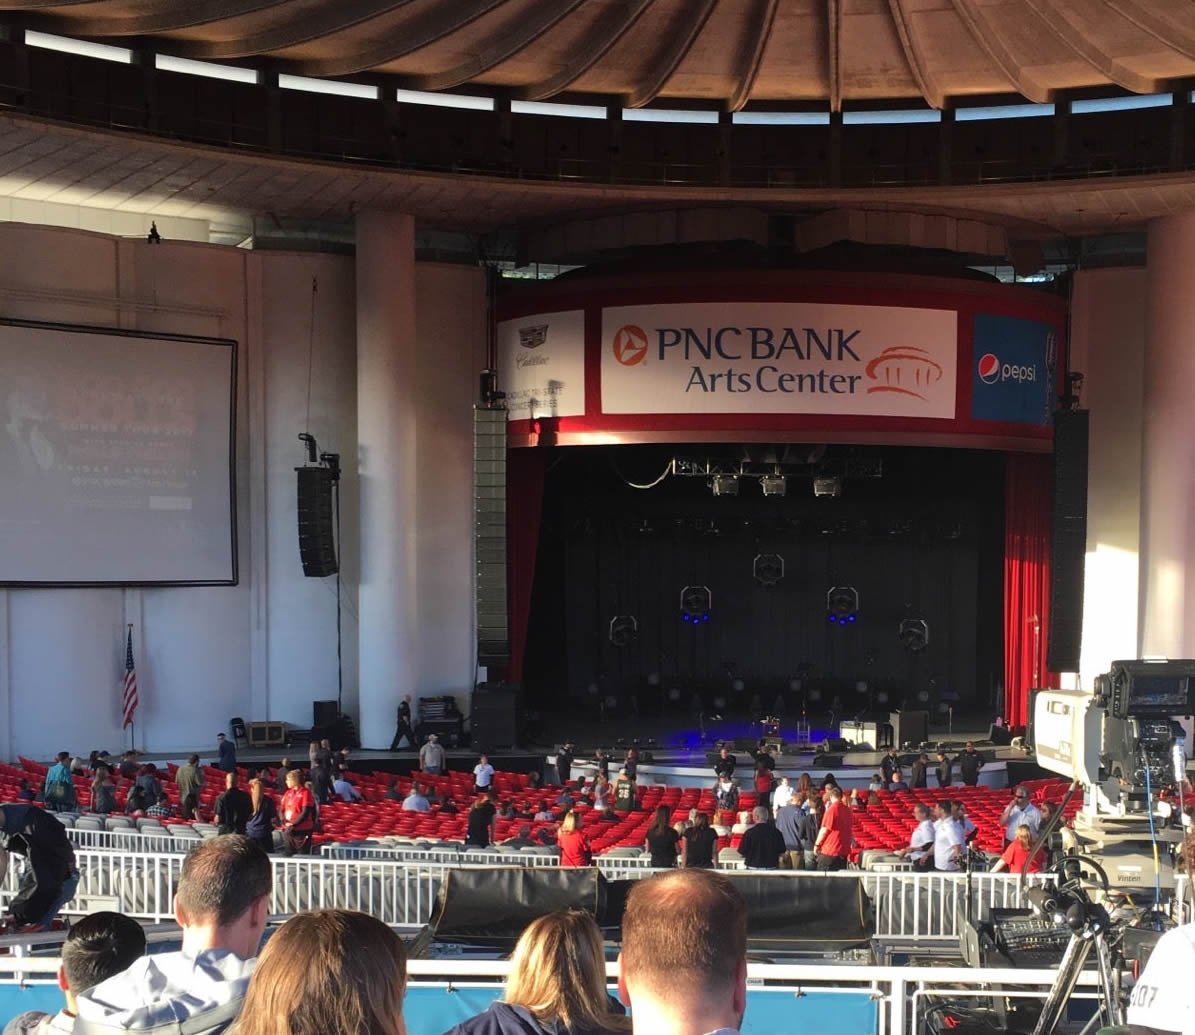 section 403 seat view  - pnc bank arts center